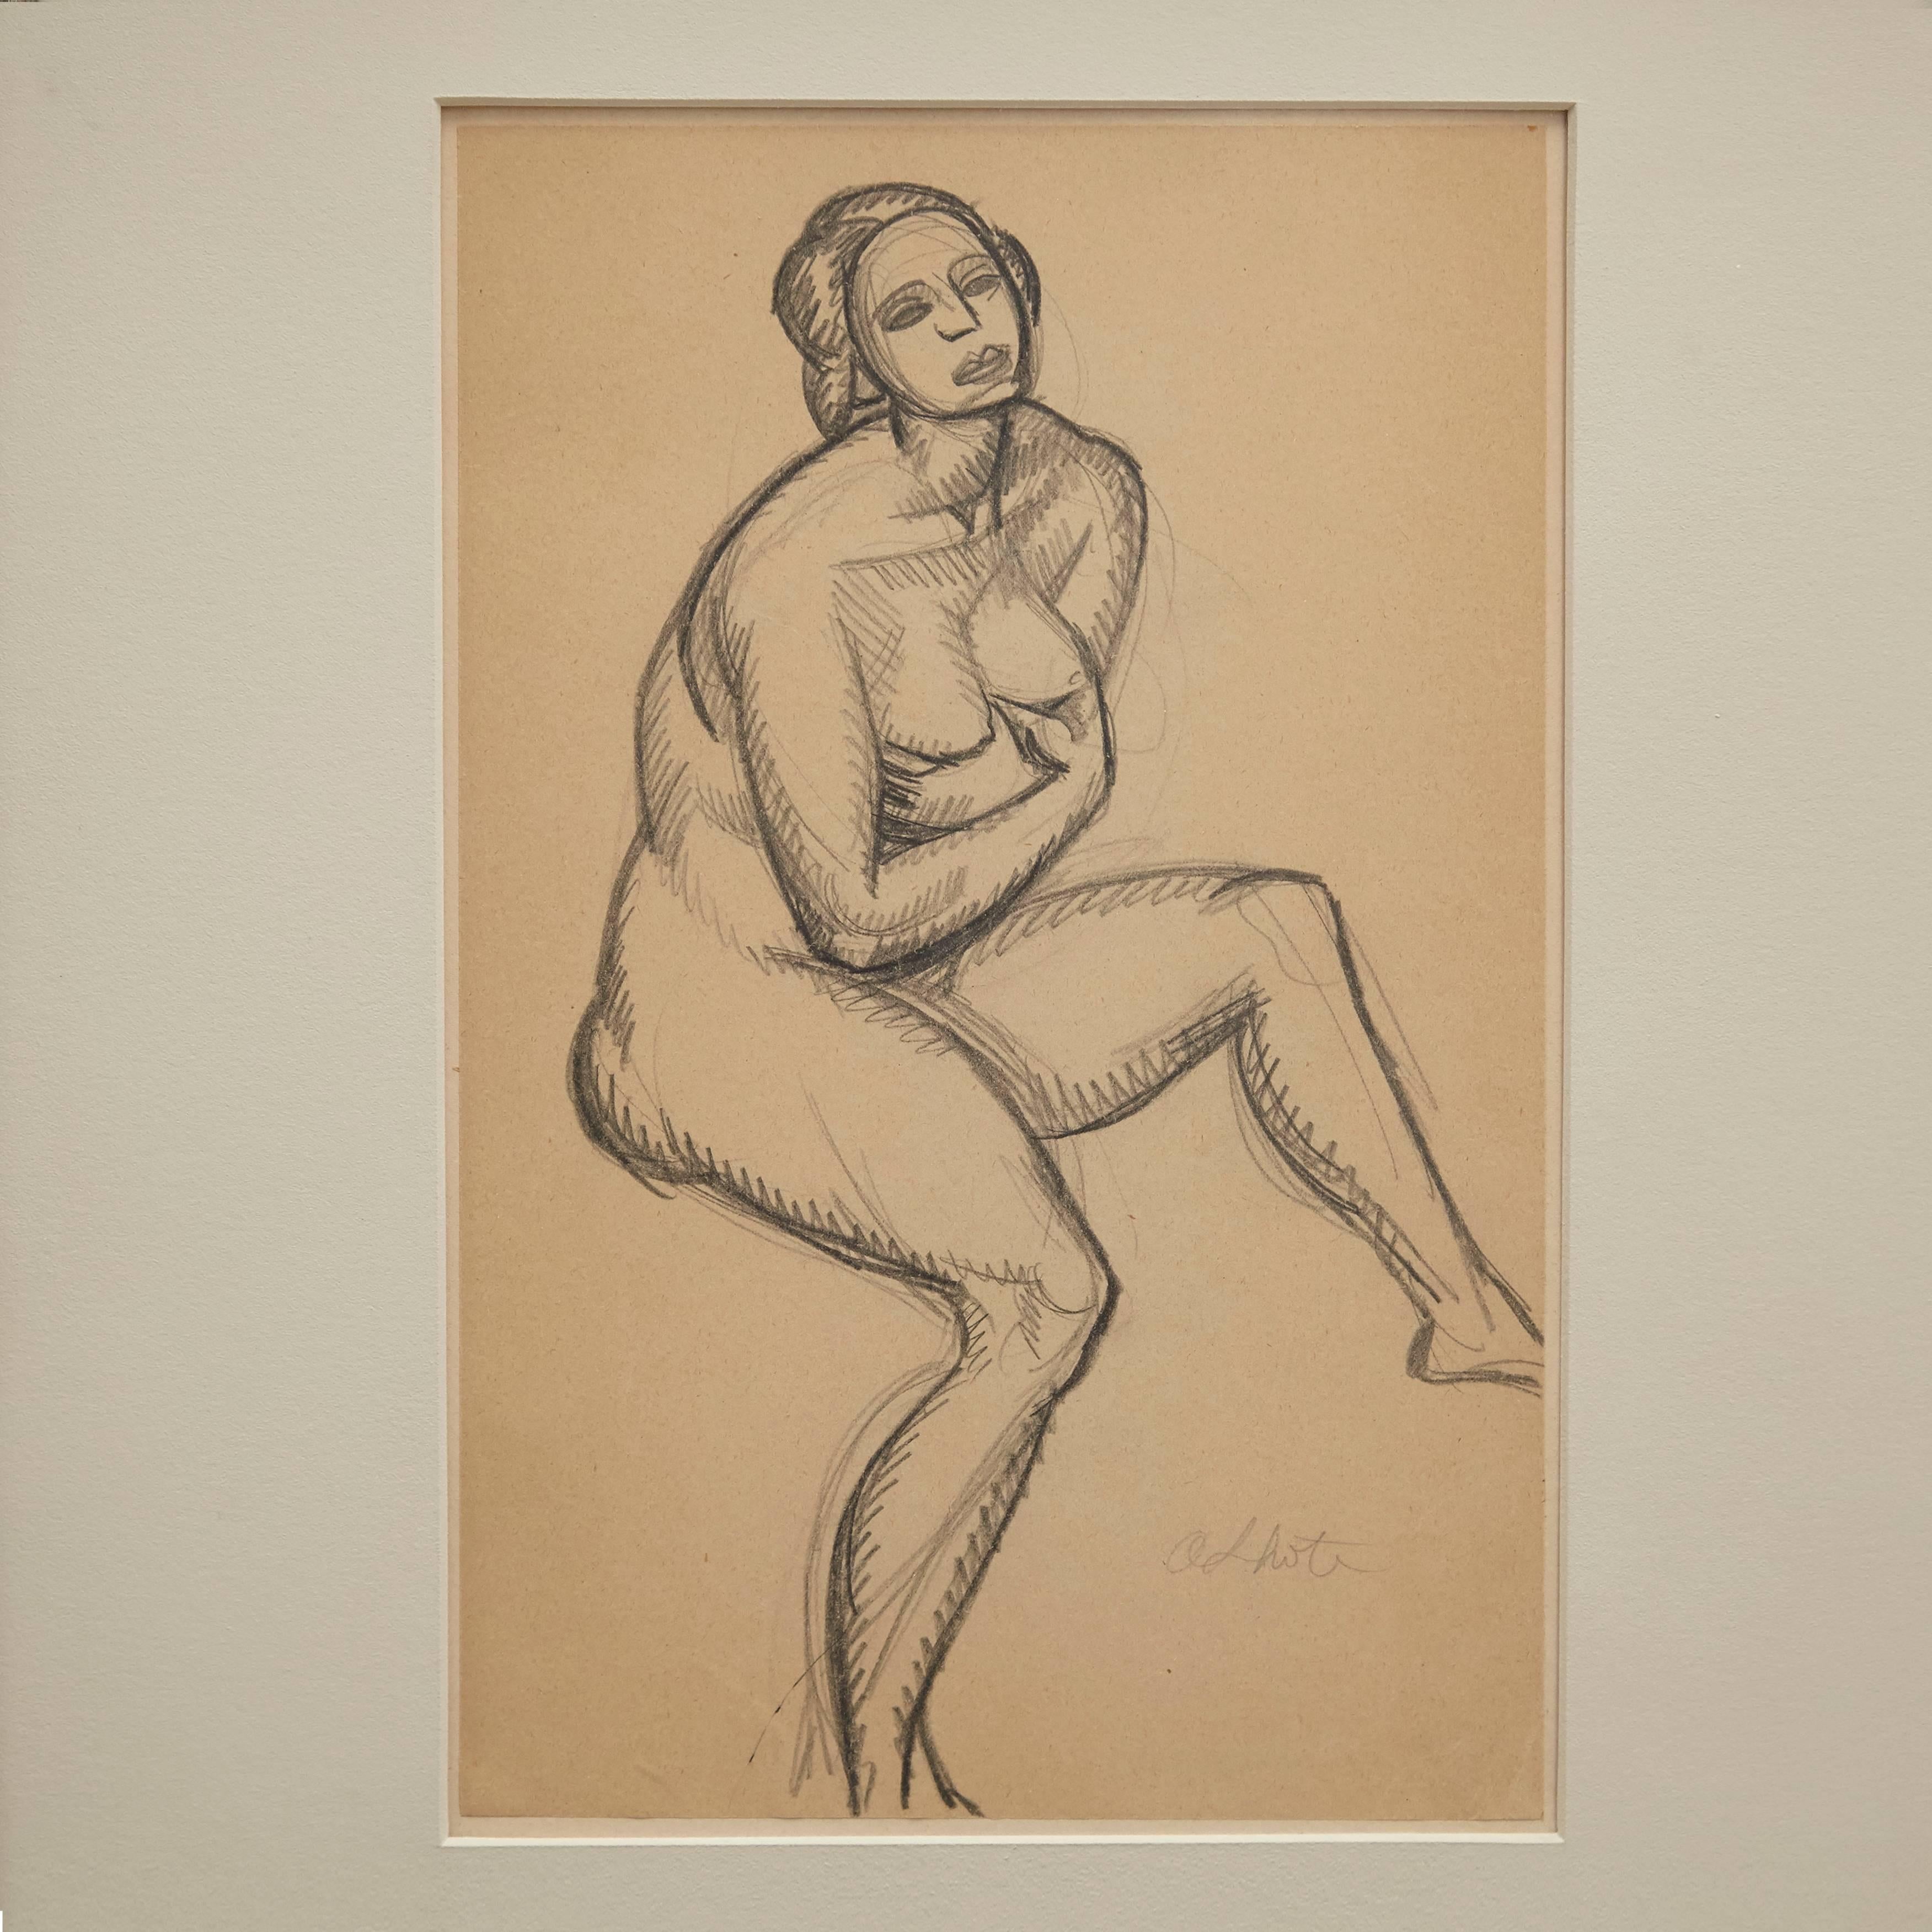 Drawing in pencil made by Andre Lhote in France, circa 1920.
Framed in a 1920s frame with museum glass.

Andre Lhote was born in 1885 and was a French Cubist painter of figure subjects, portraits, landscapes and still life. 

After initially